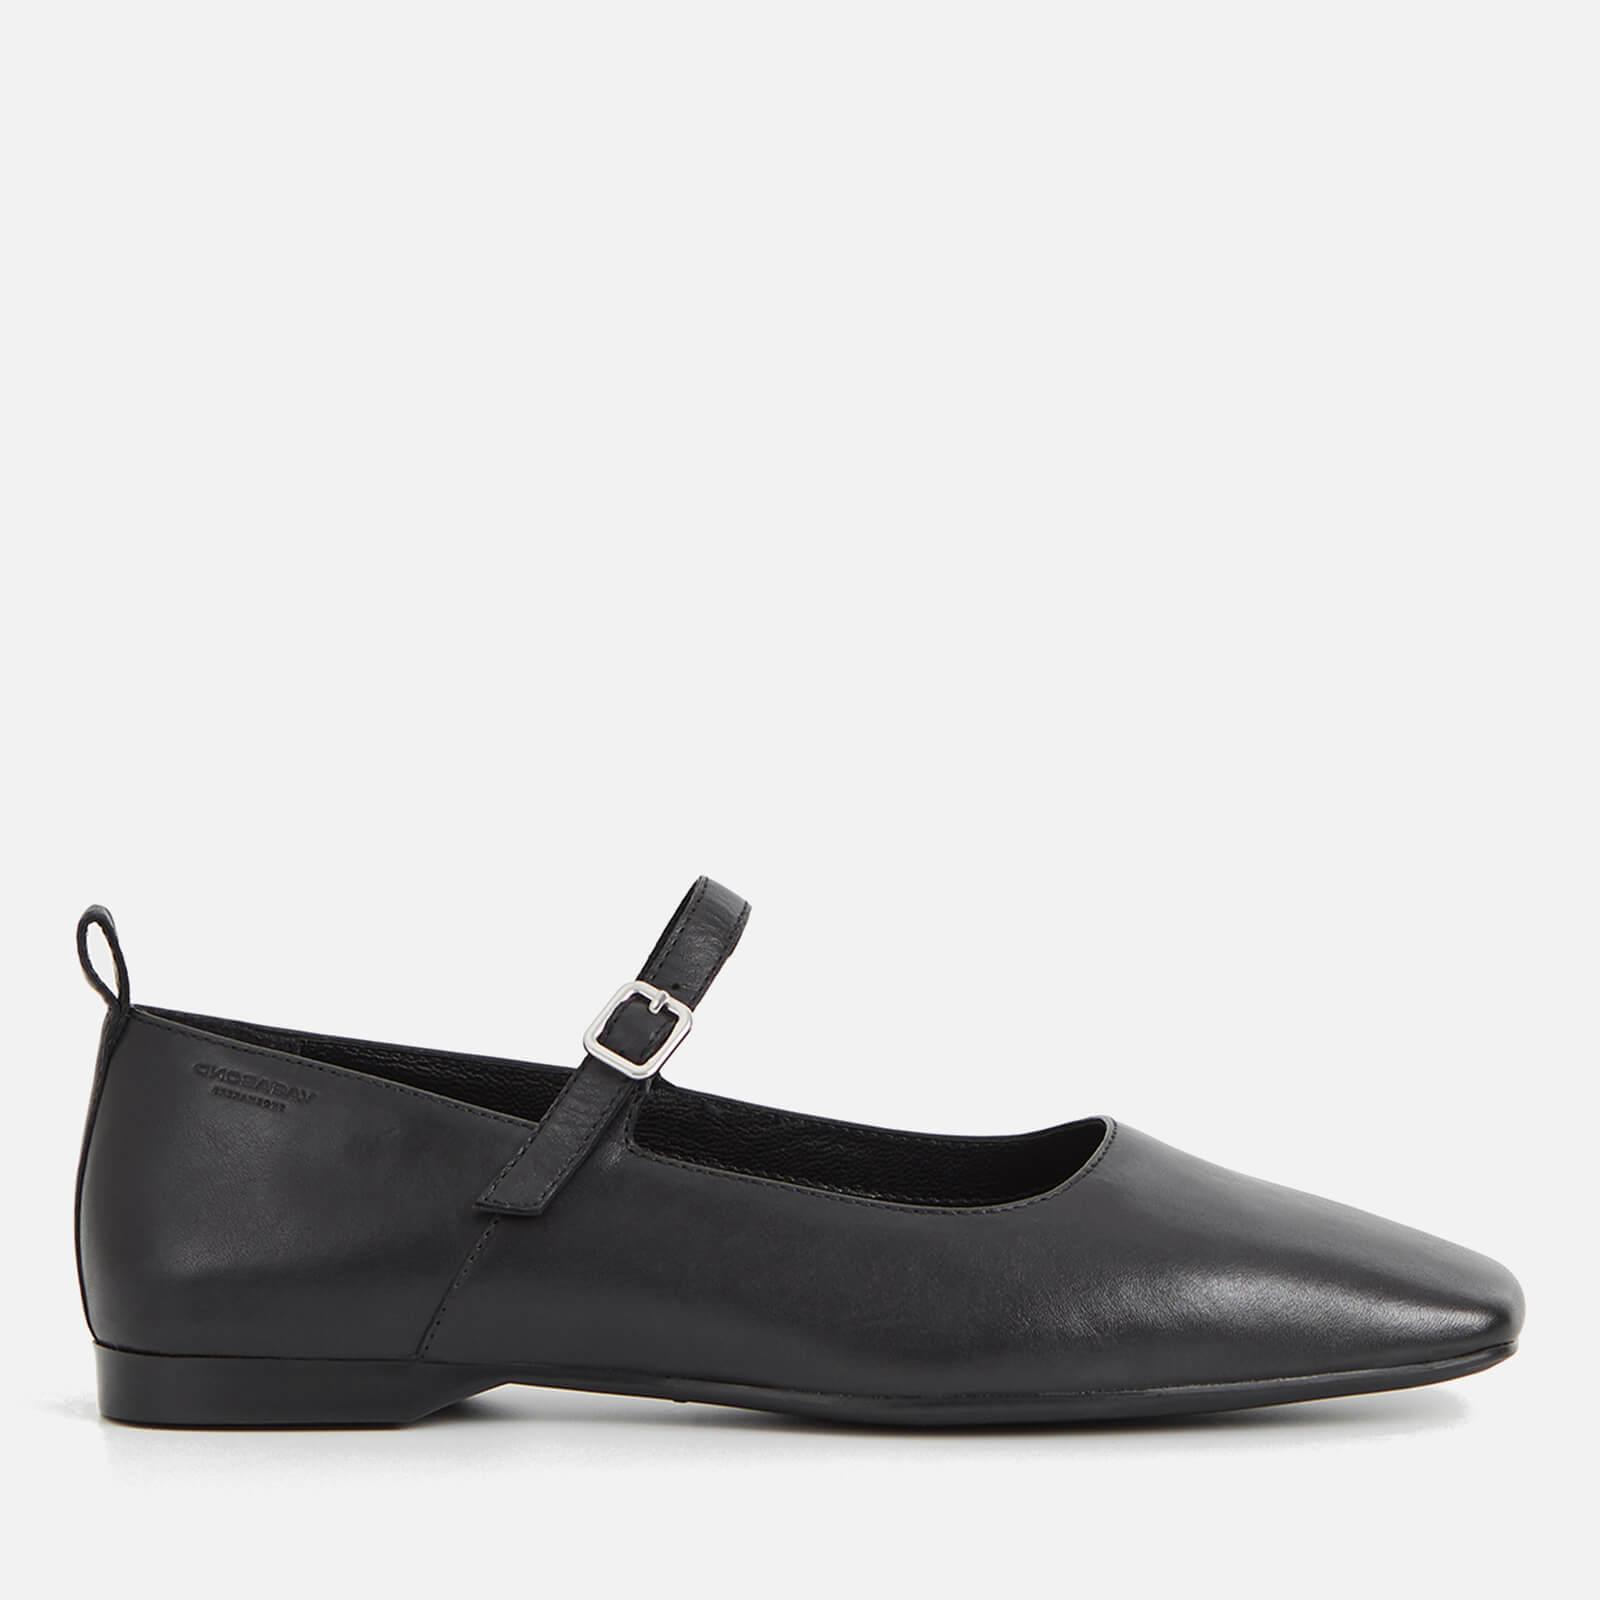 Vagabond Shoemakers Delia Leather Mary-jane Flats in Black | Lyst